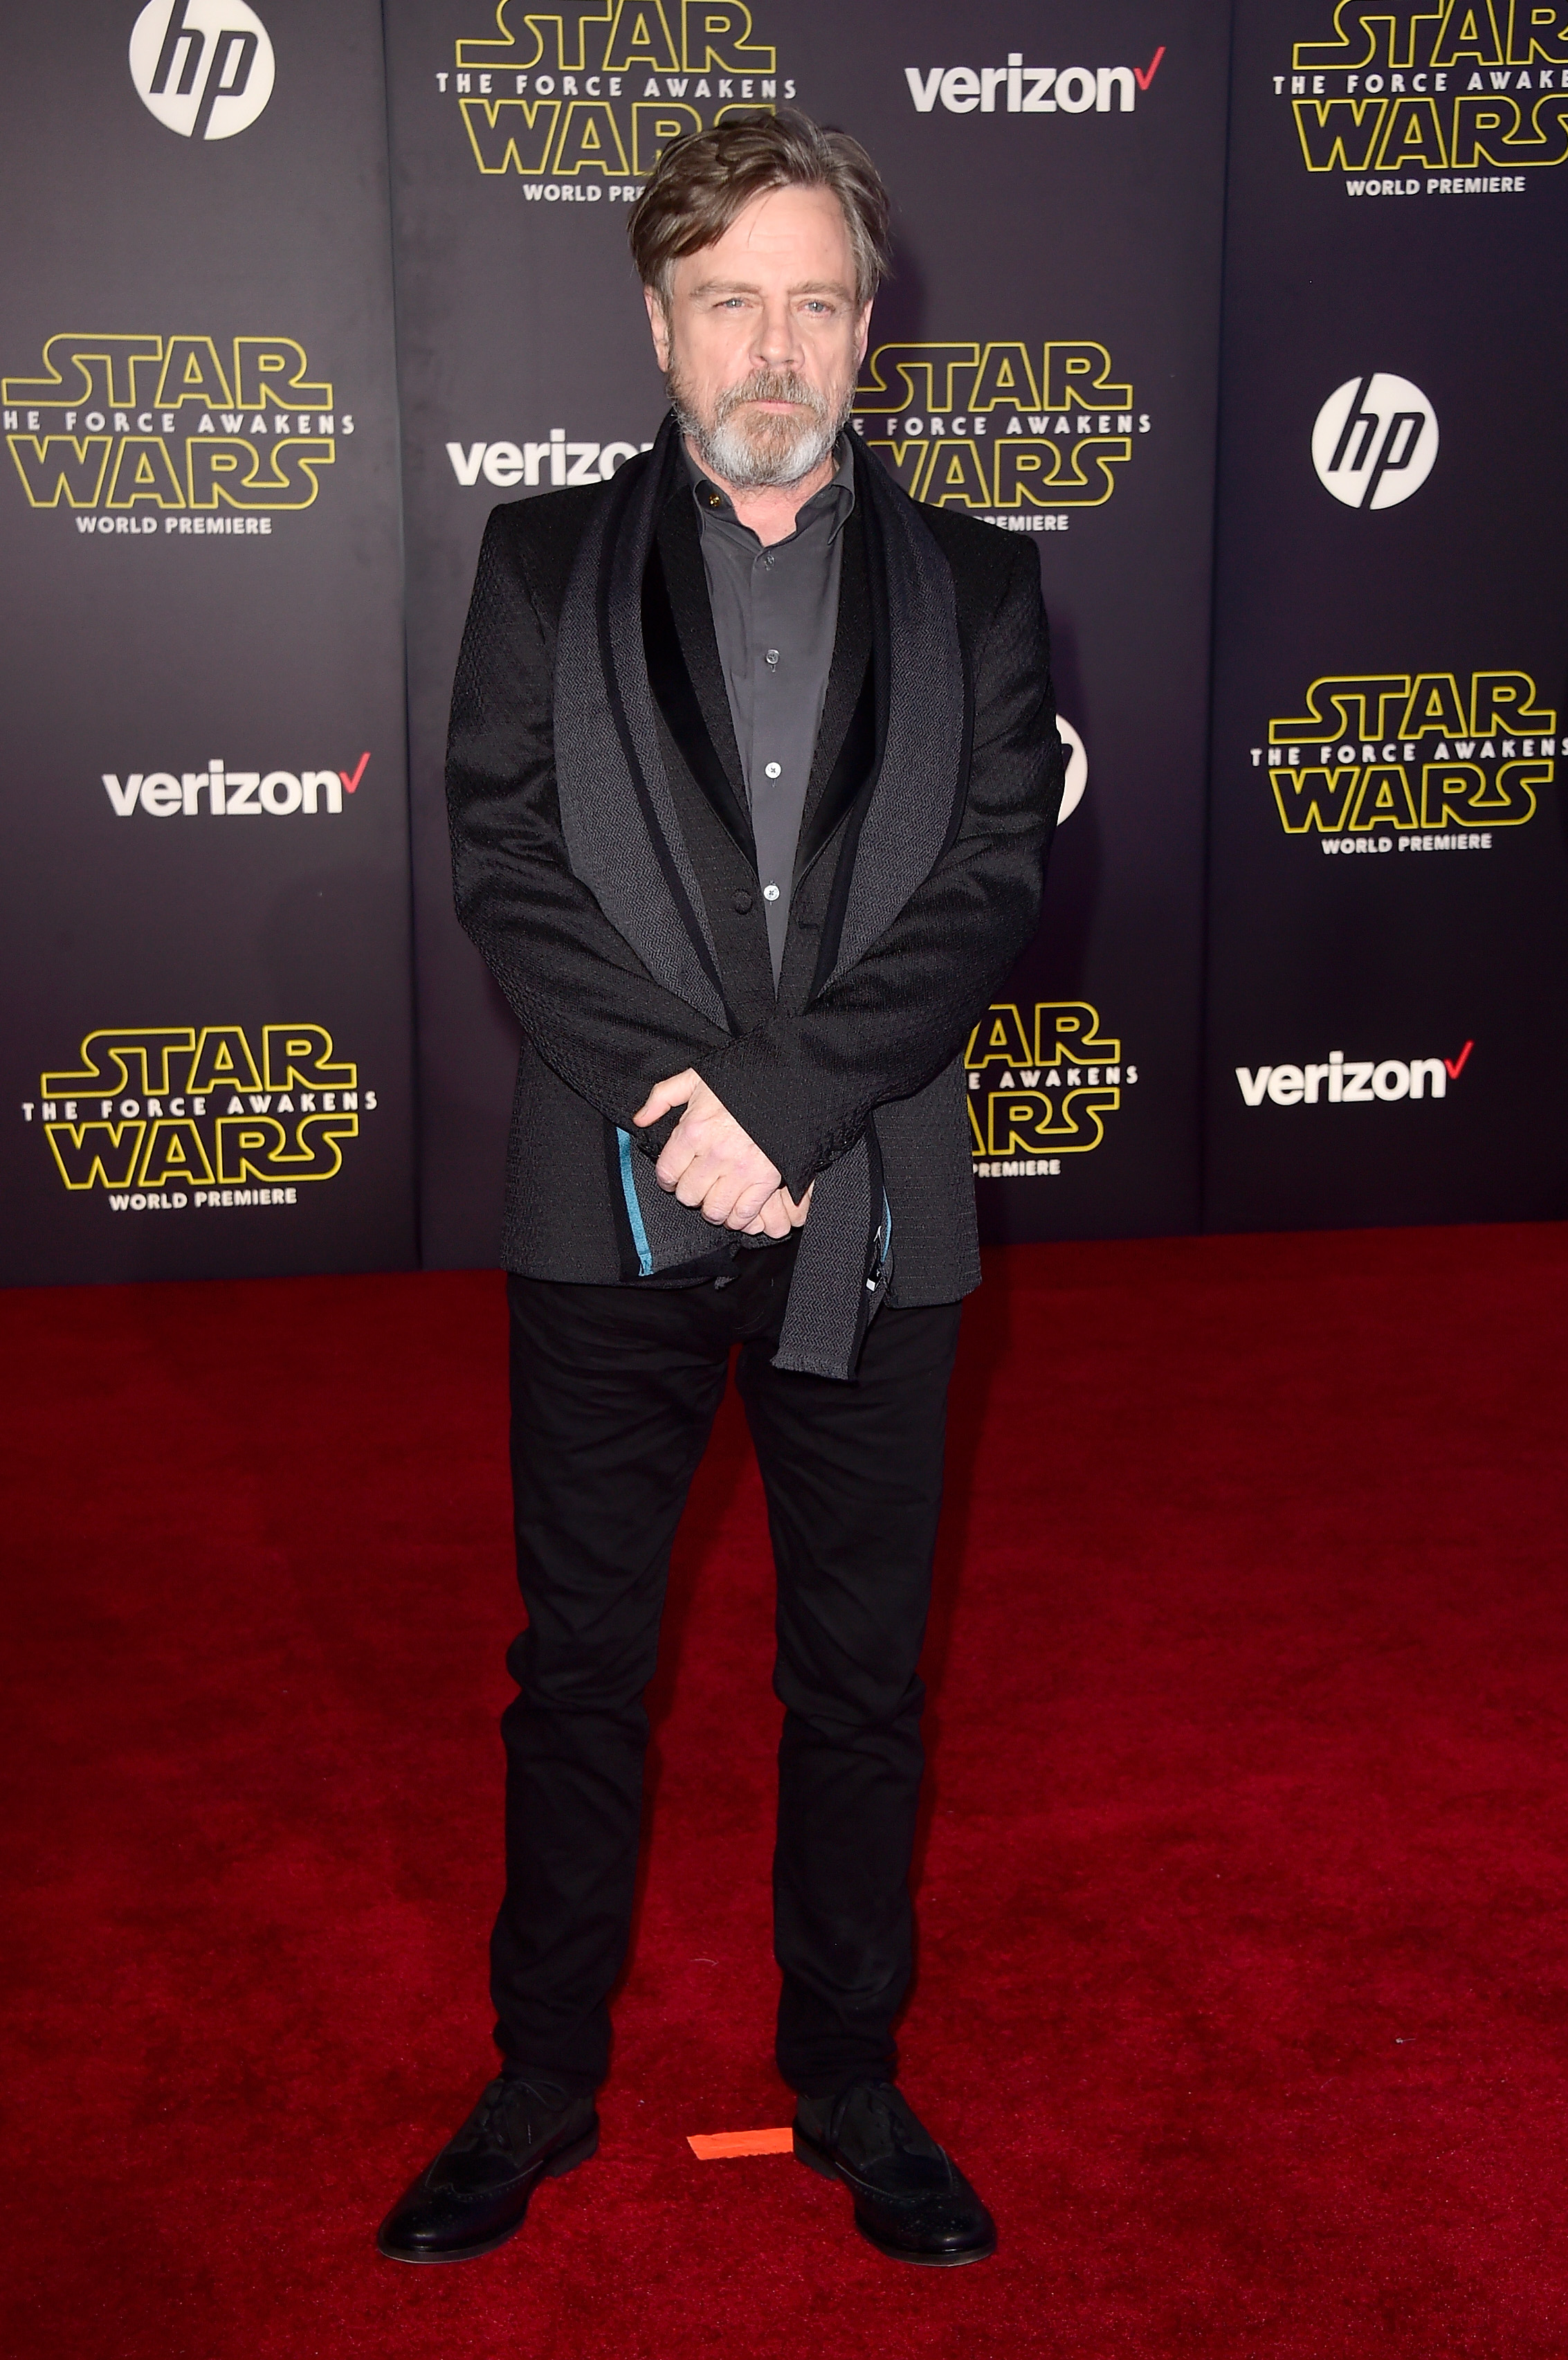 star-wars-the-force-awakens-premiere-mark-hamill-GettyImages-501374410.jpg